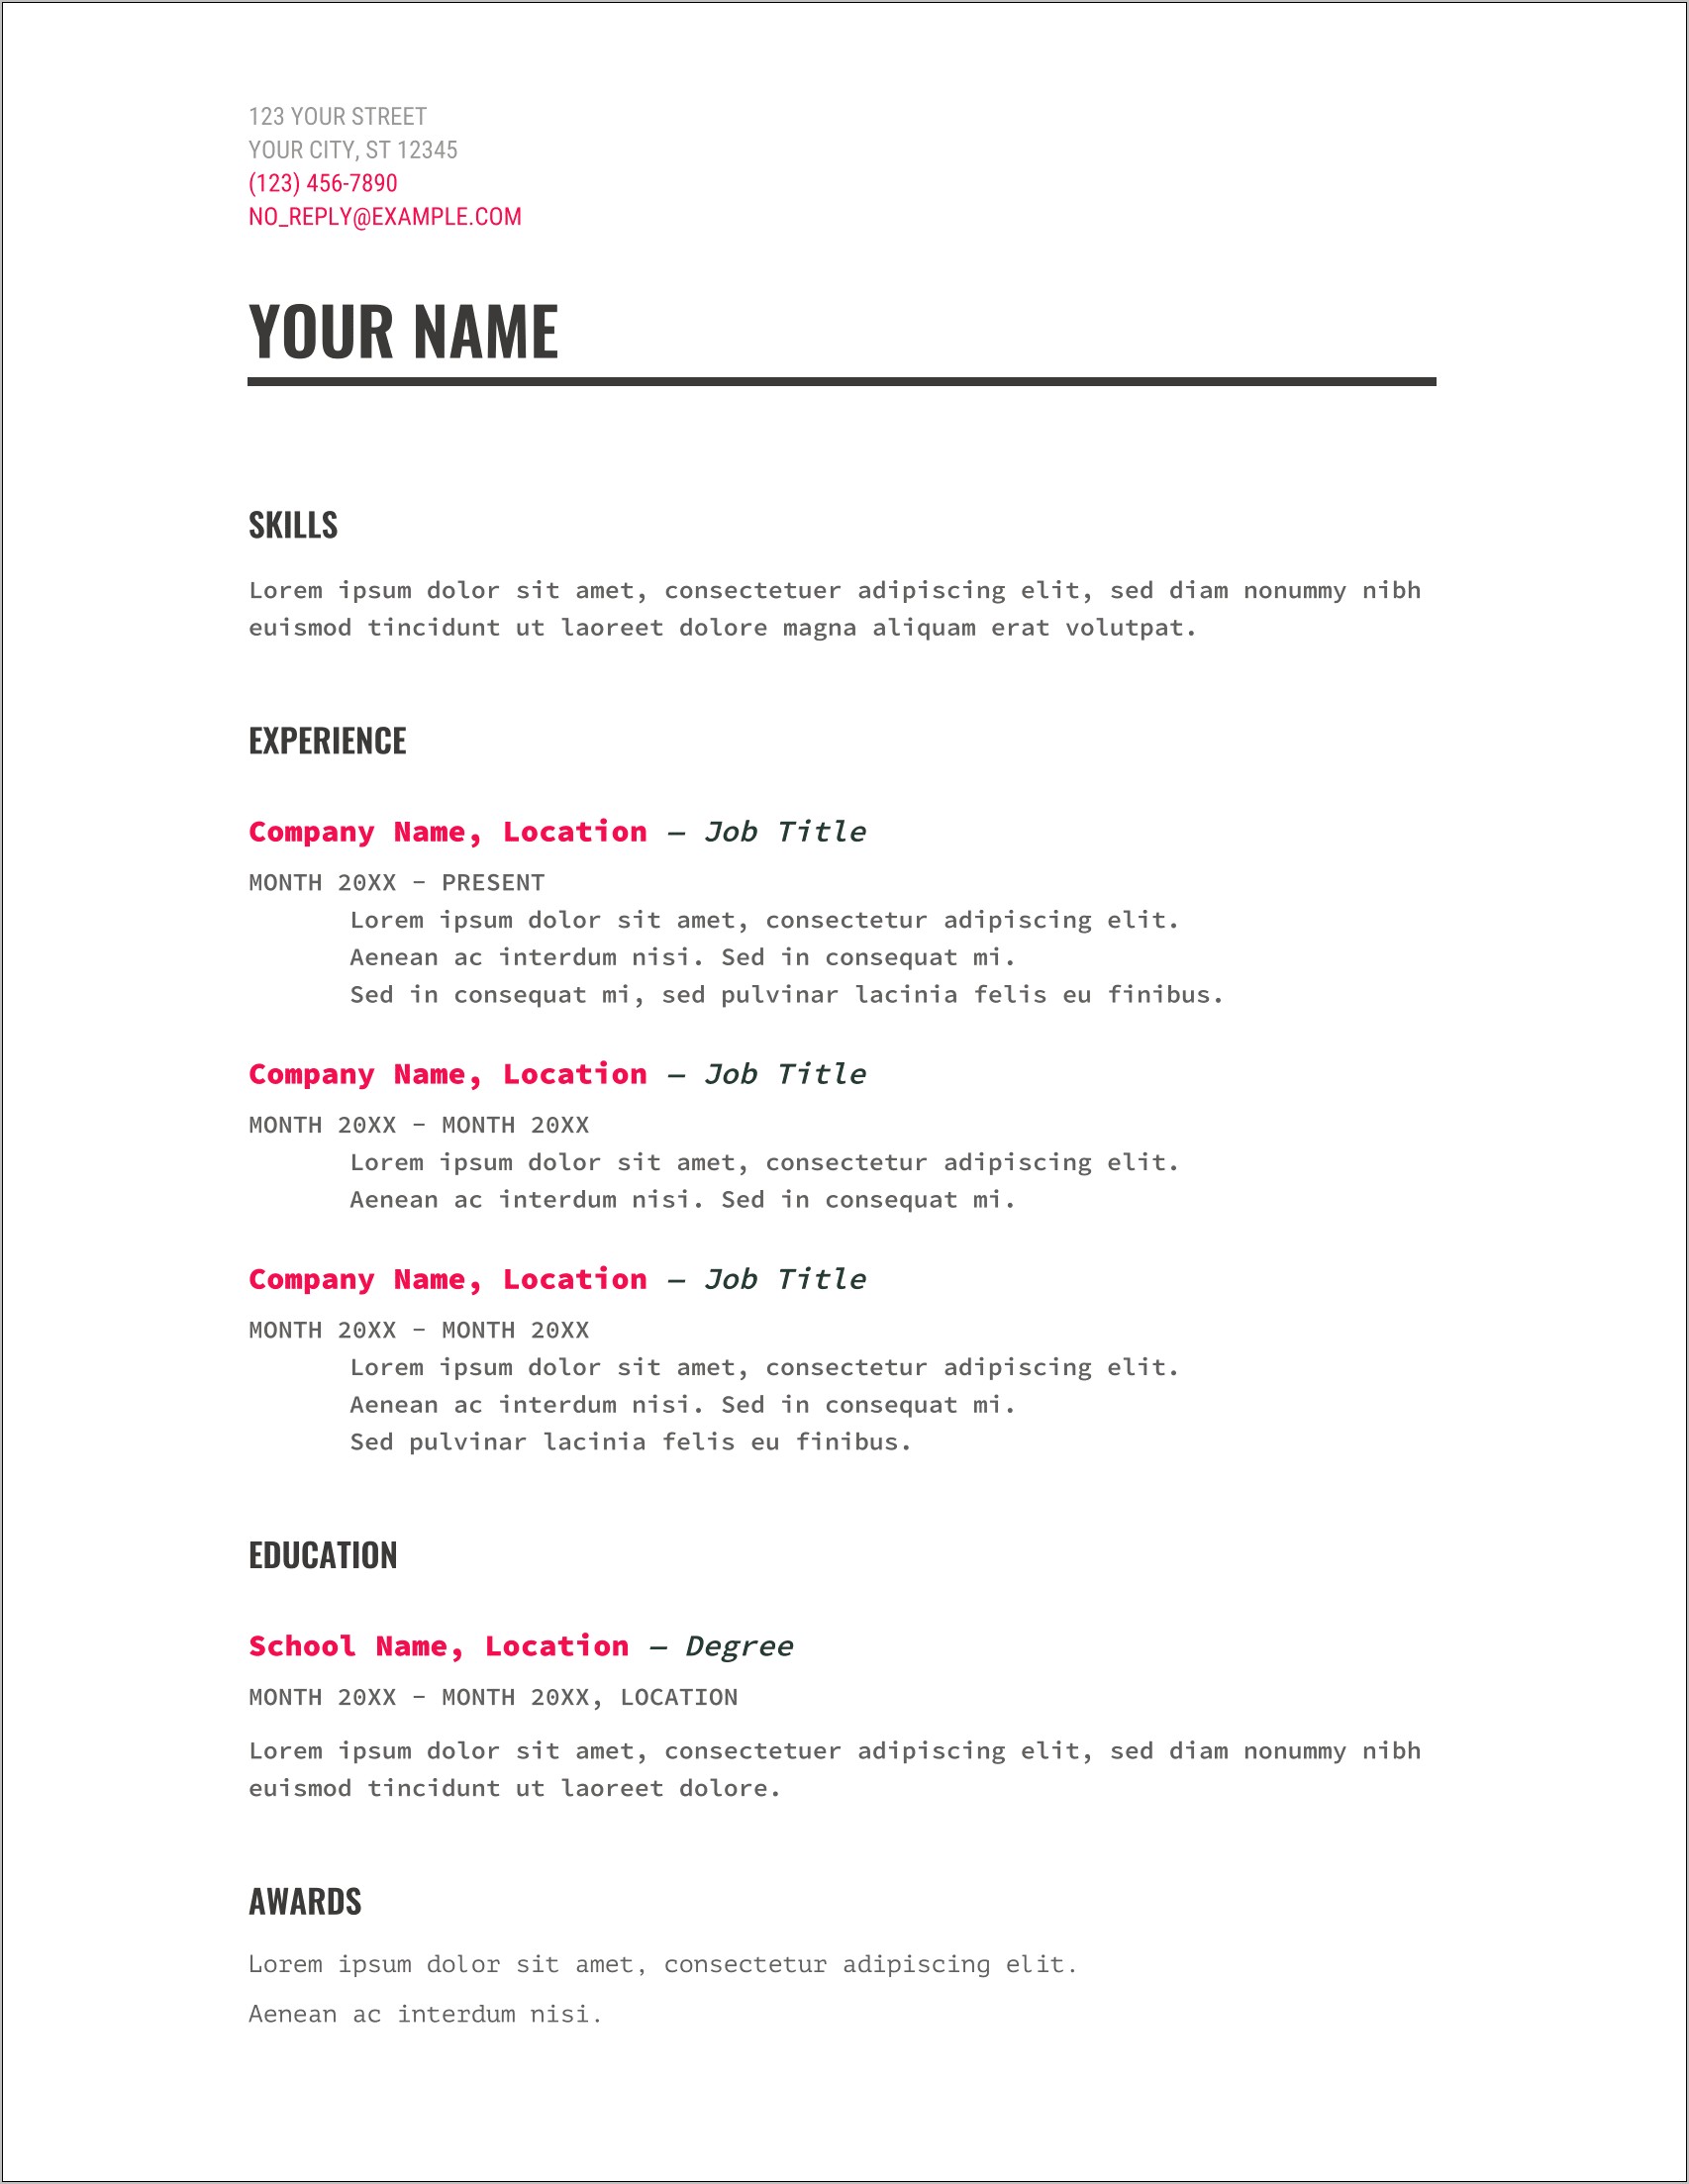 Creating A Resume Template In Google Docs